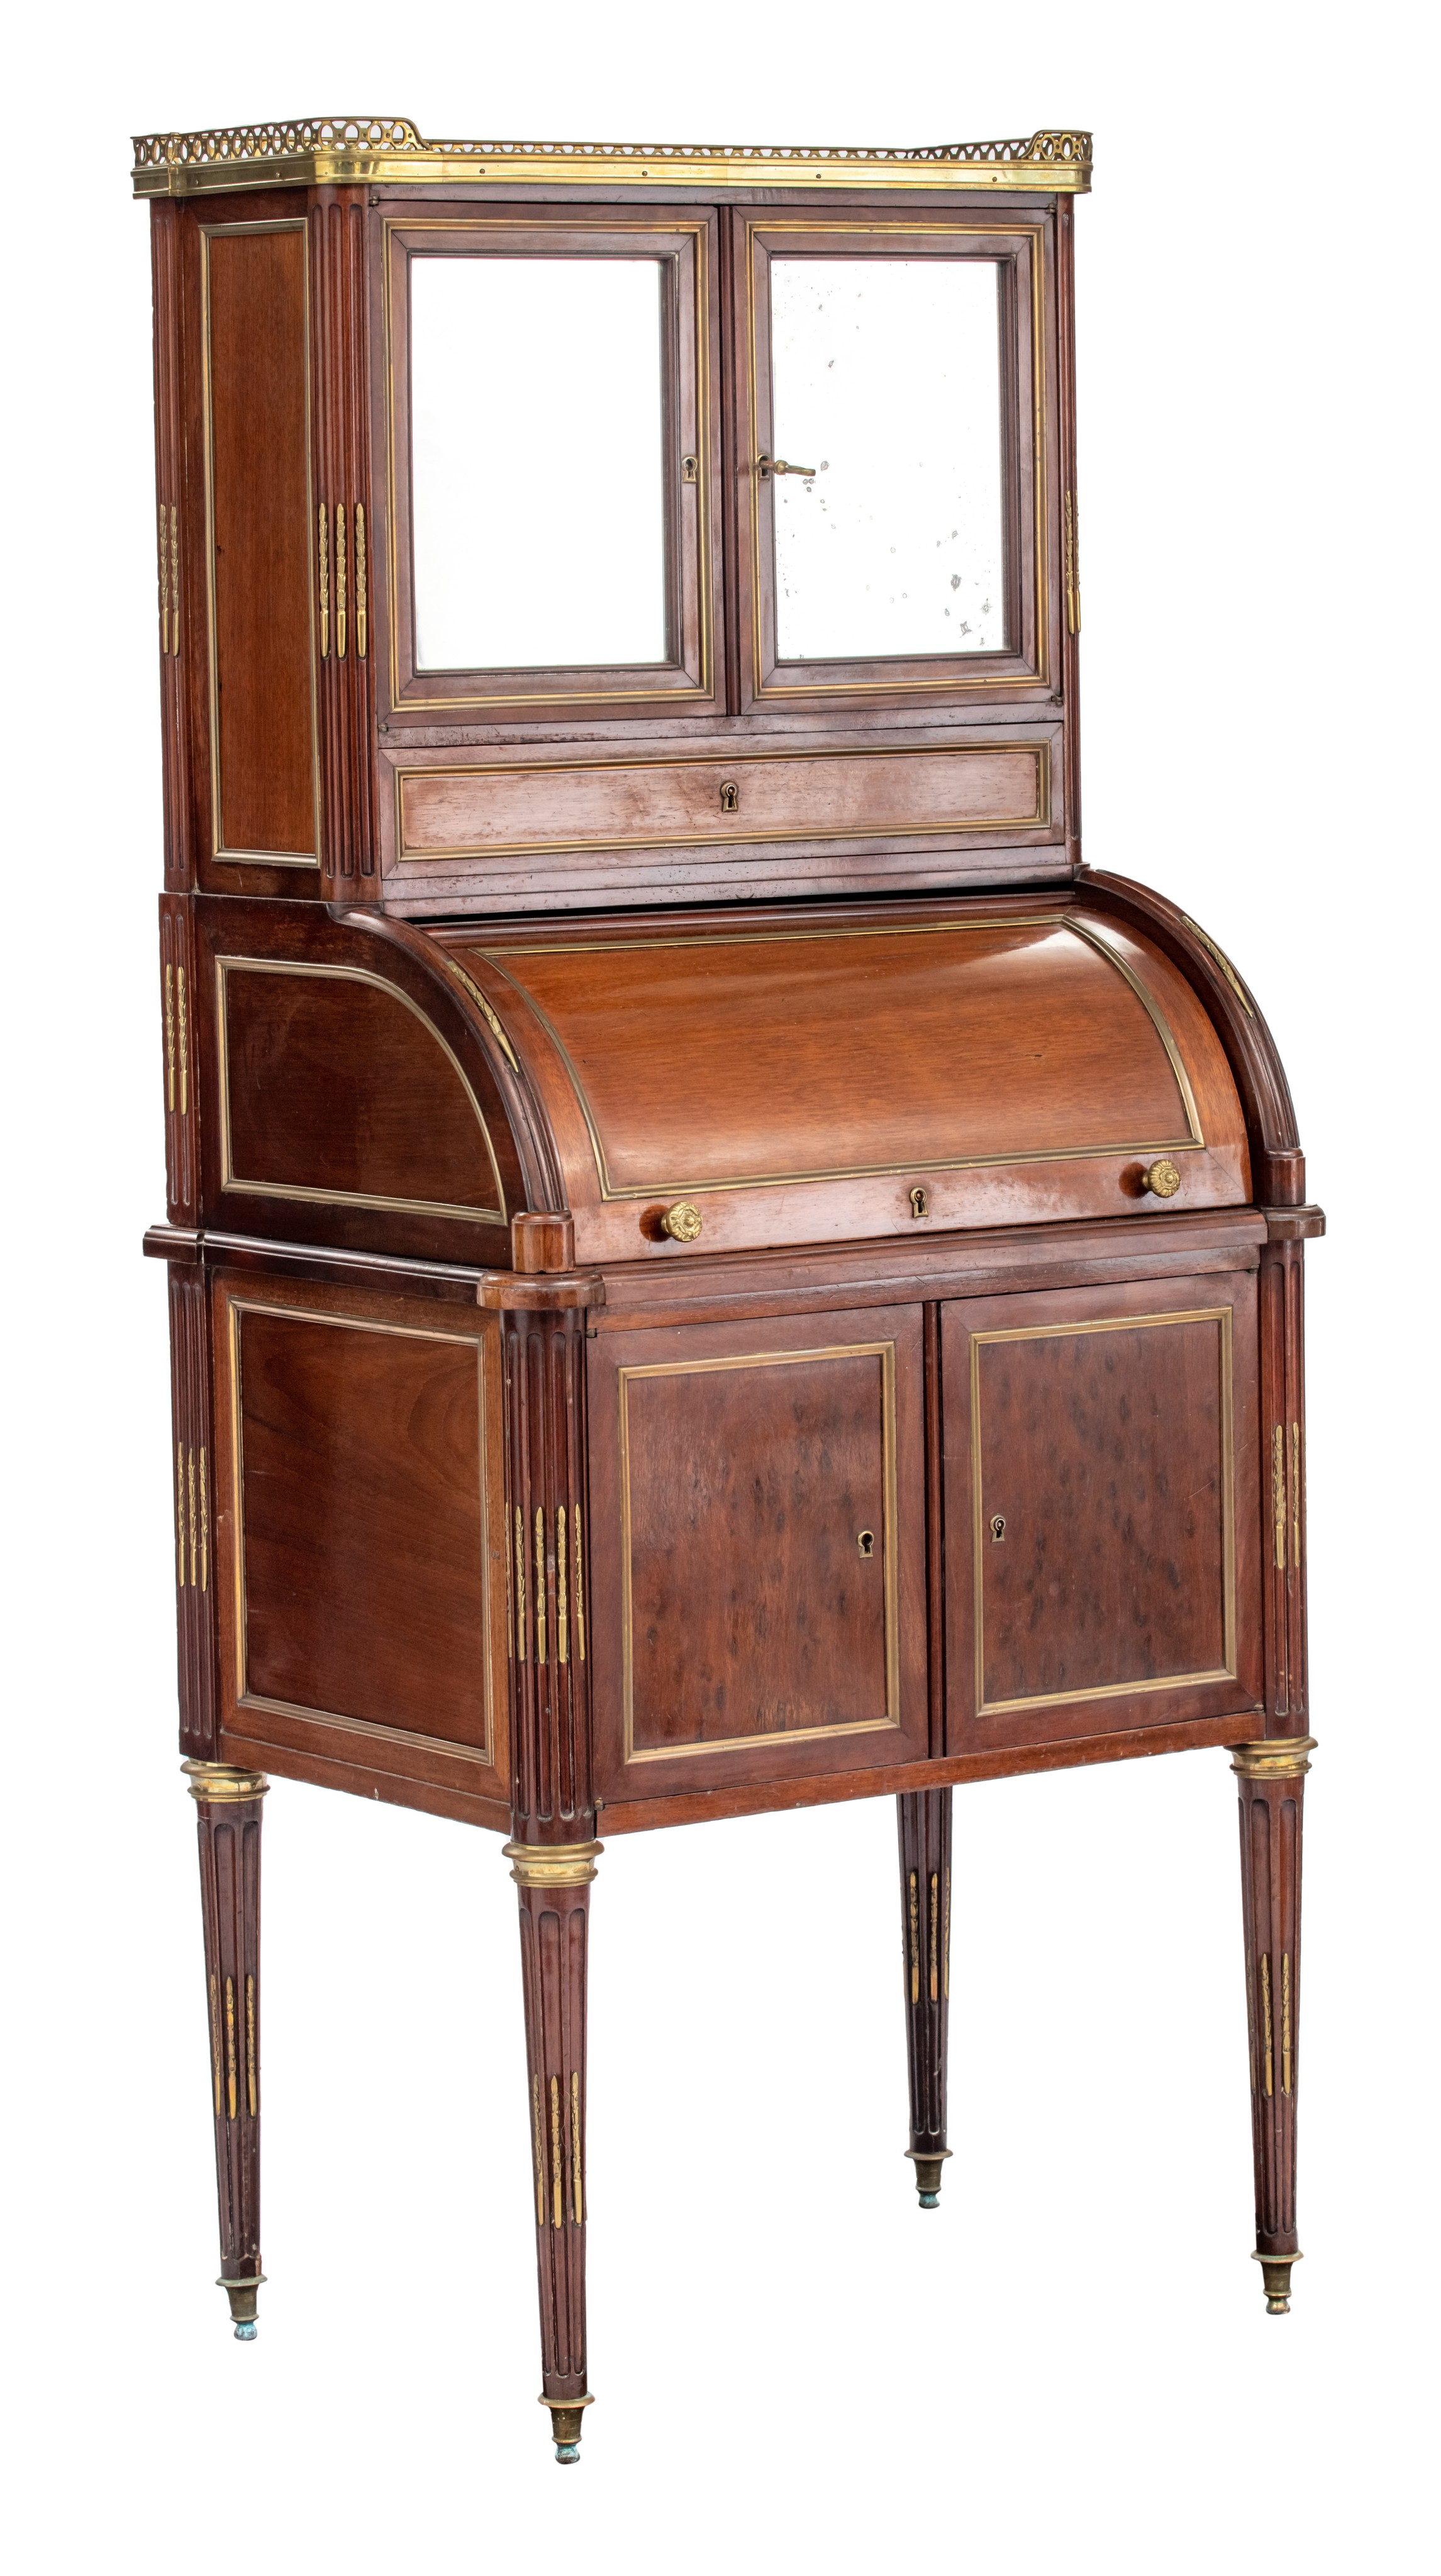 A Louis XVI style mahogany veneered lady's roll-top desk, H 140 - W 61 - D 44 cm - Image 2 of 8